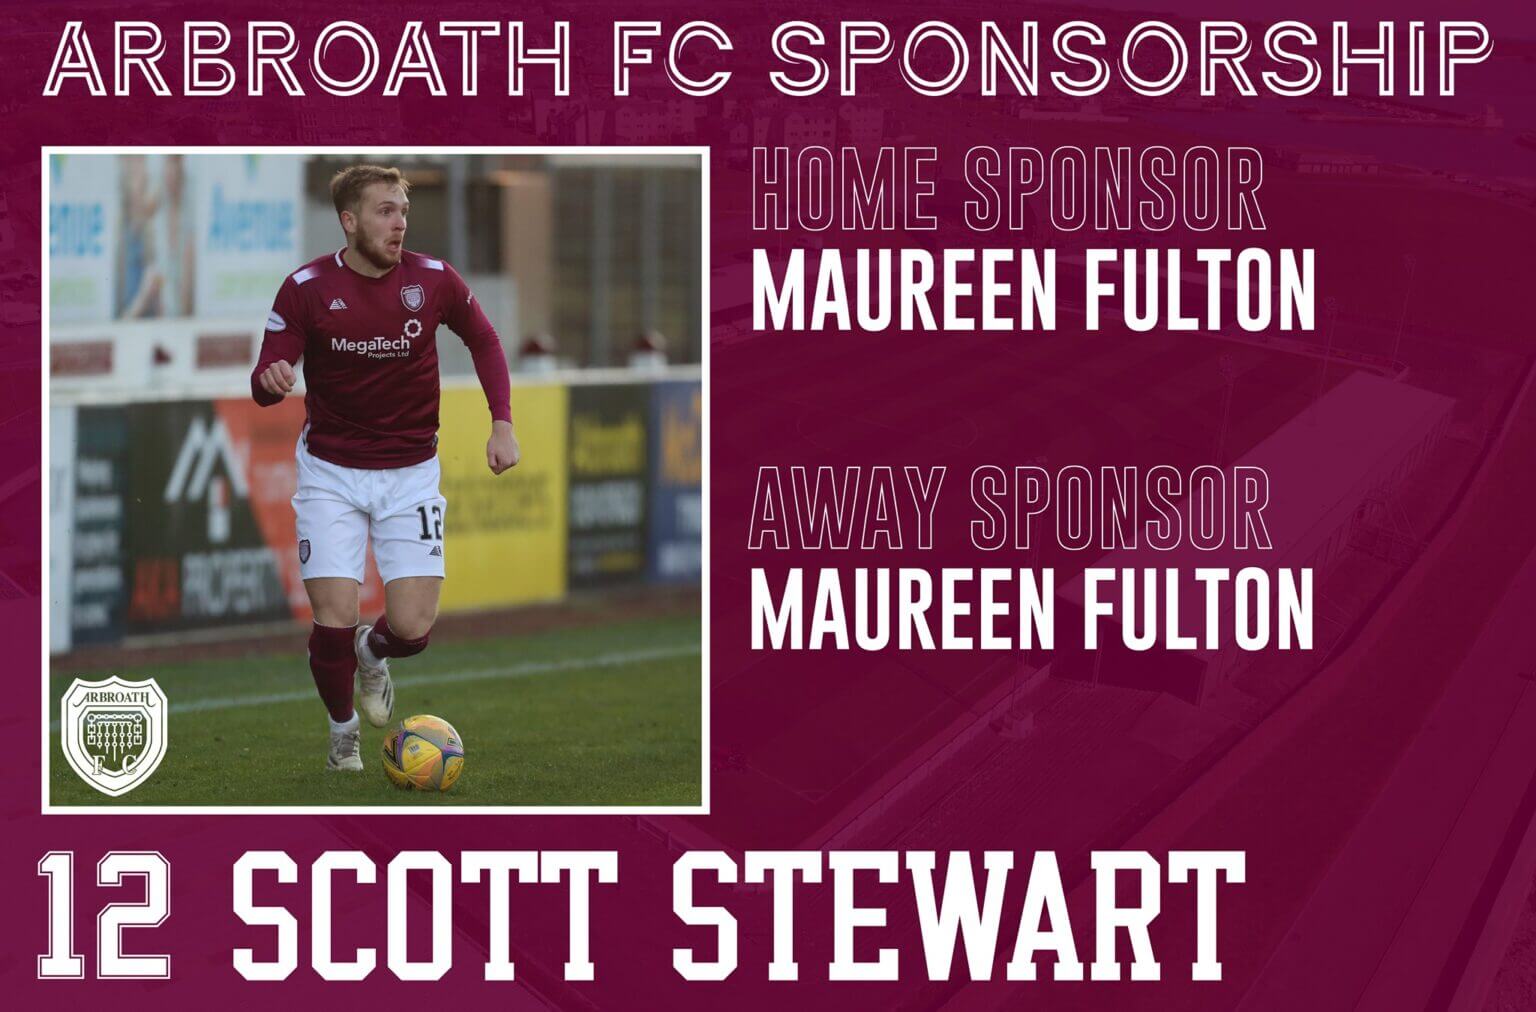 Player Sponsorship - Home and Away - Arbroath FC